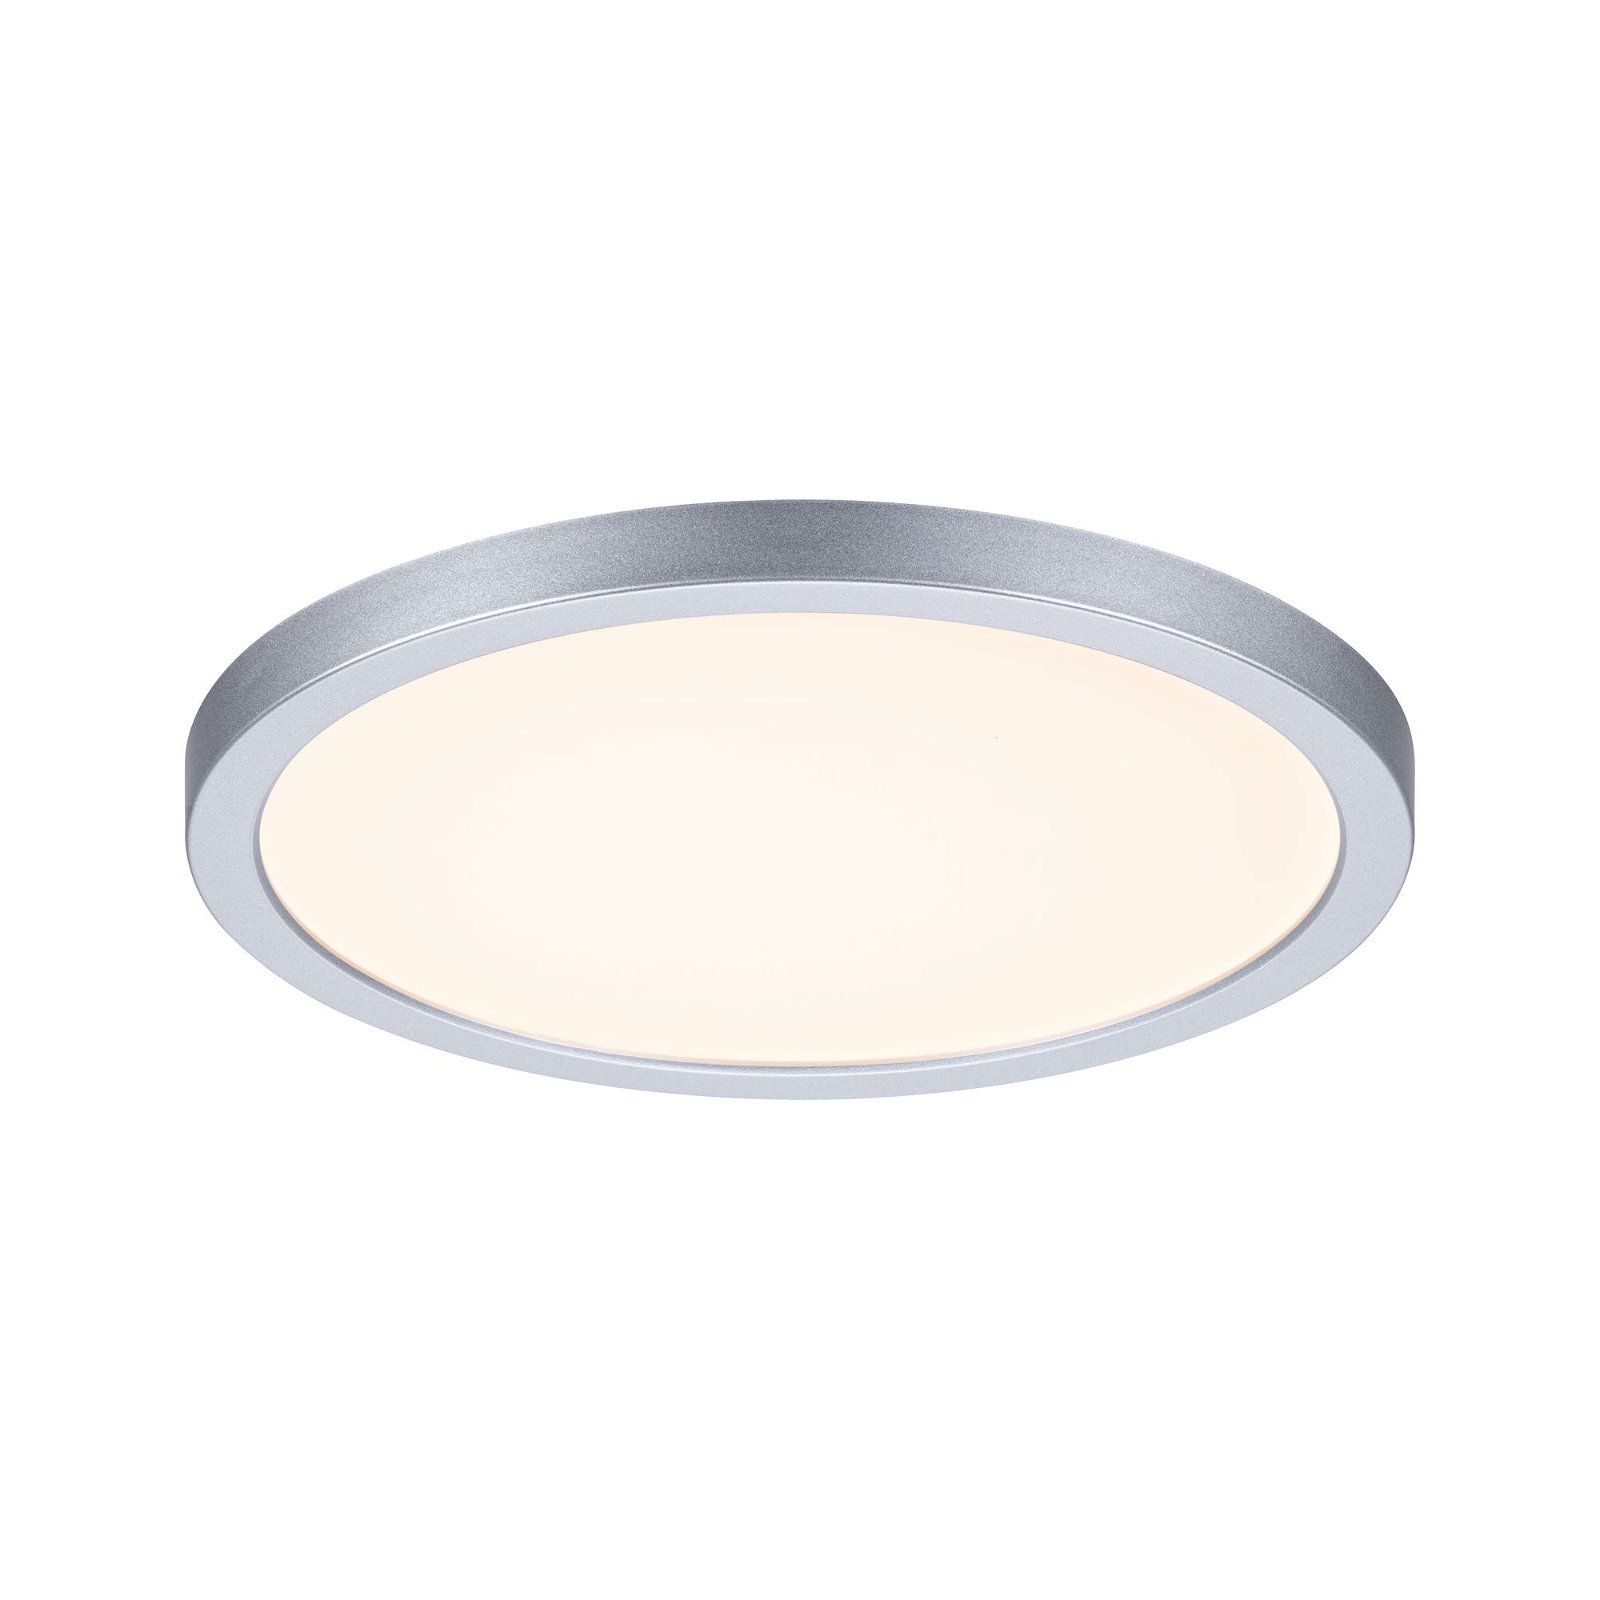 VariFit LED Recessed panel Smart Home Zigbee 3.0 Areo IP44 round 175mm 13W 1200lm Tunable White Chrome matt dimmable